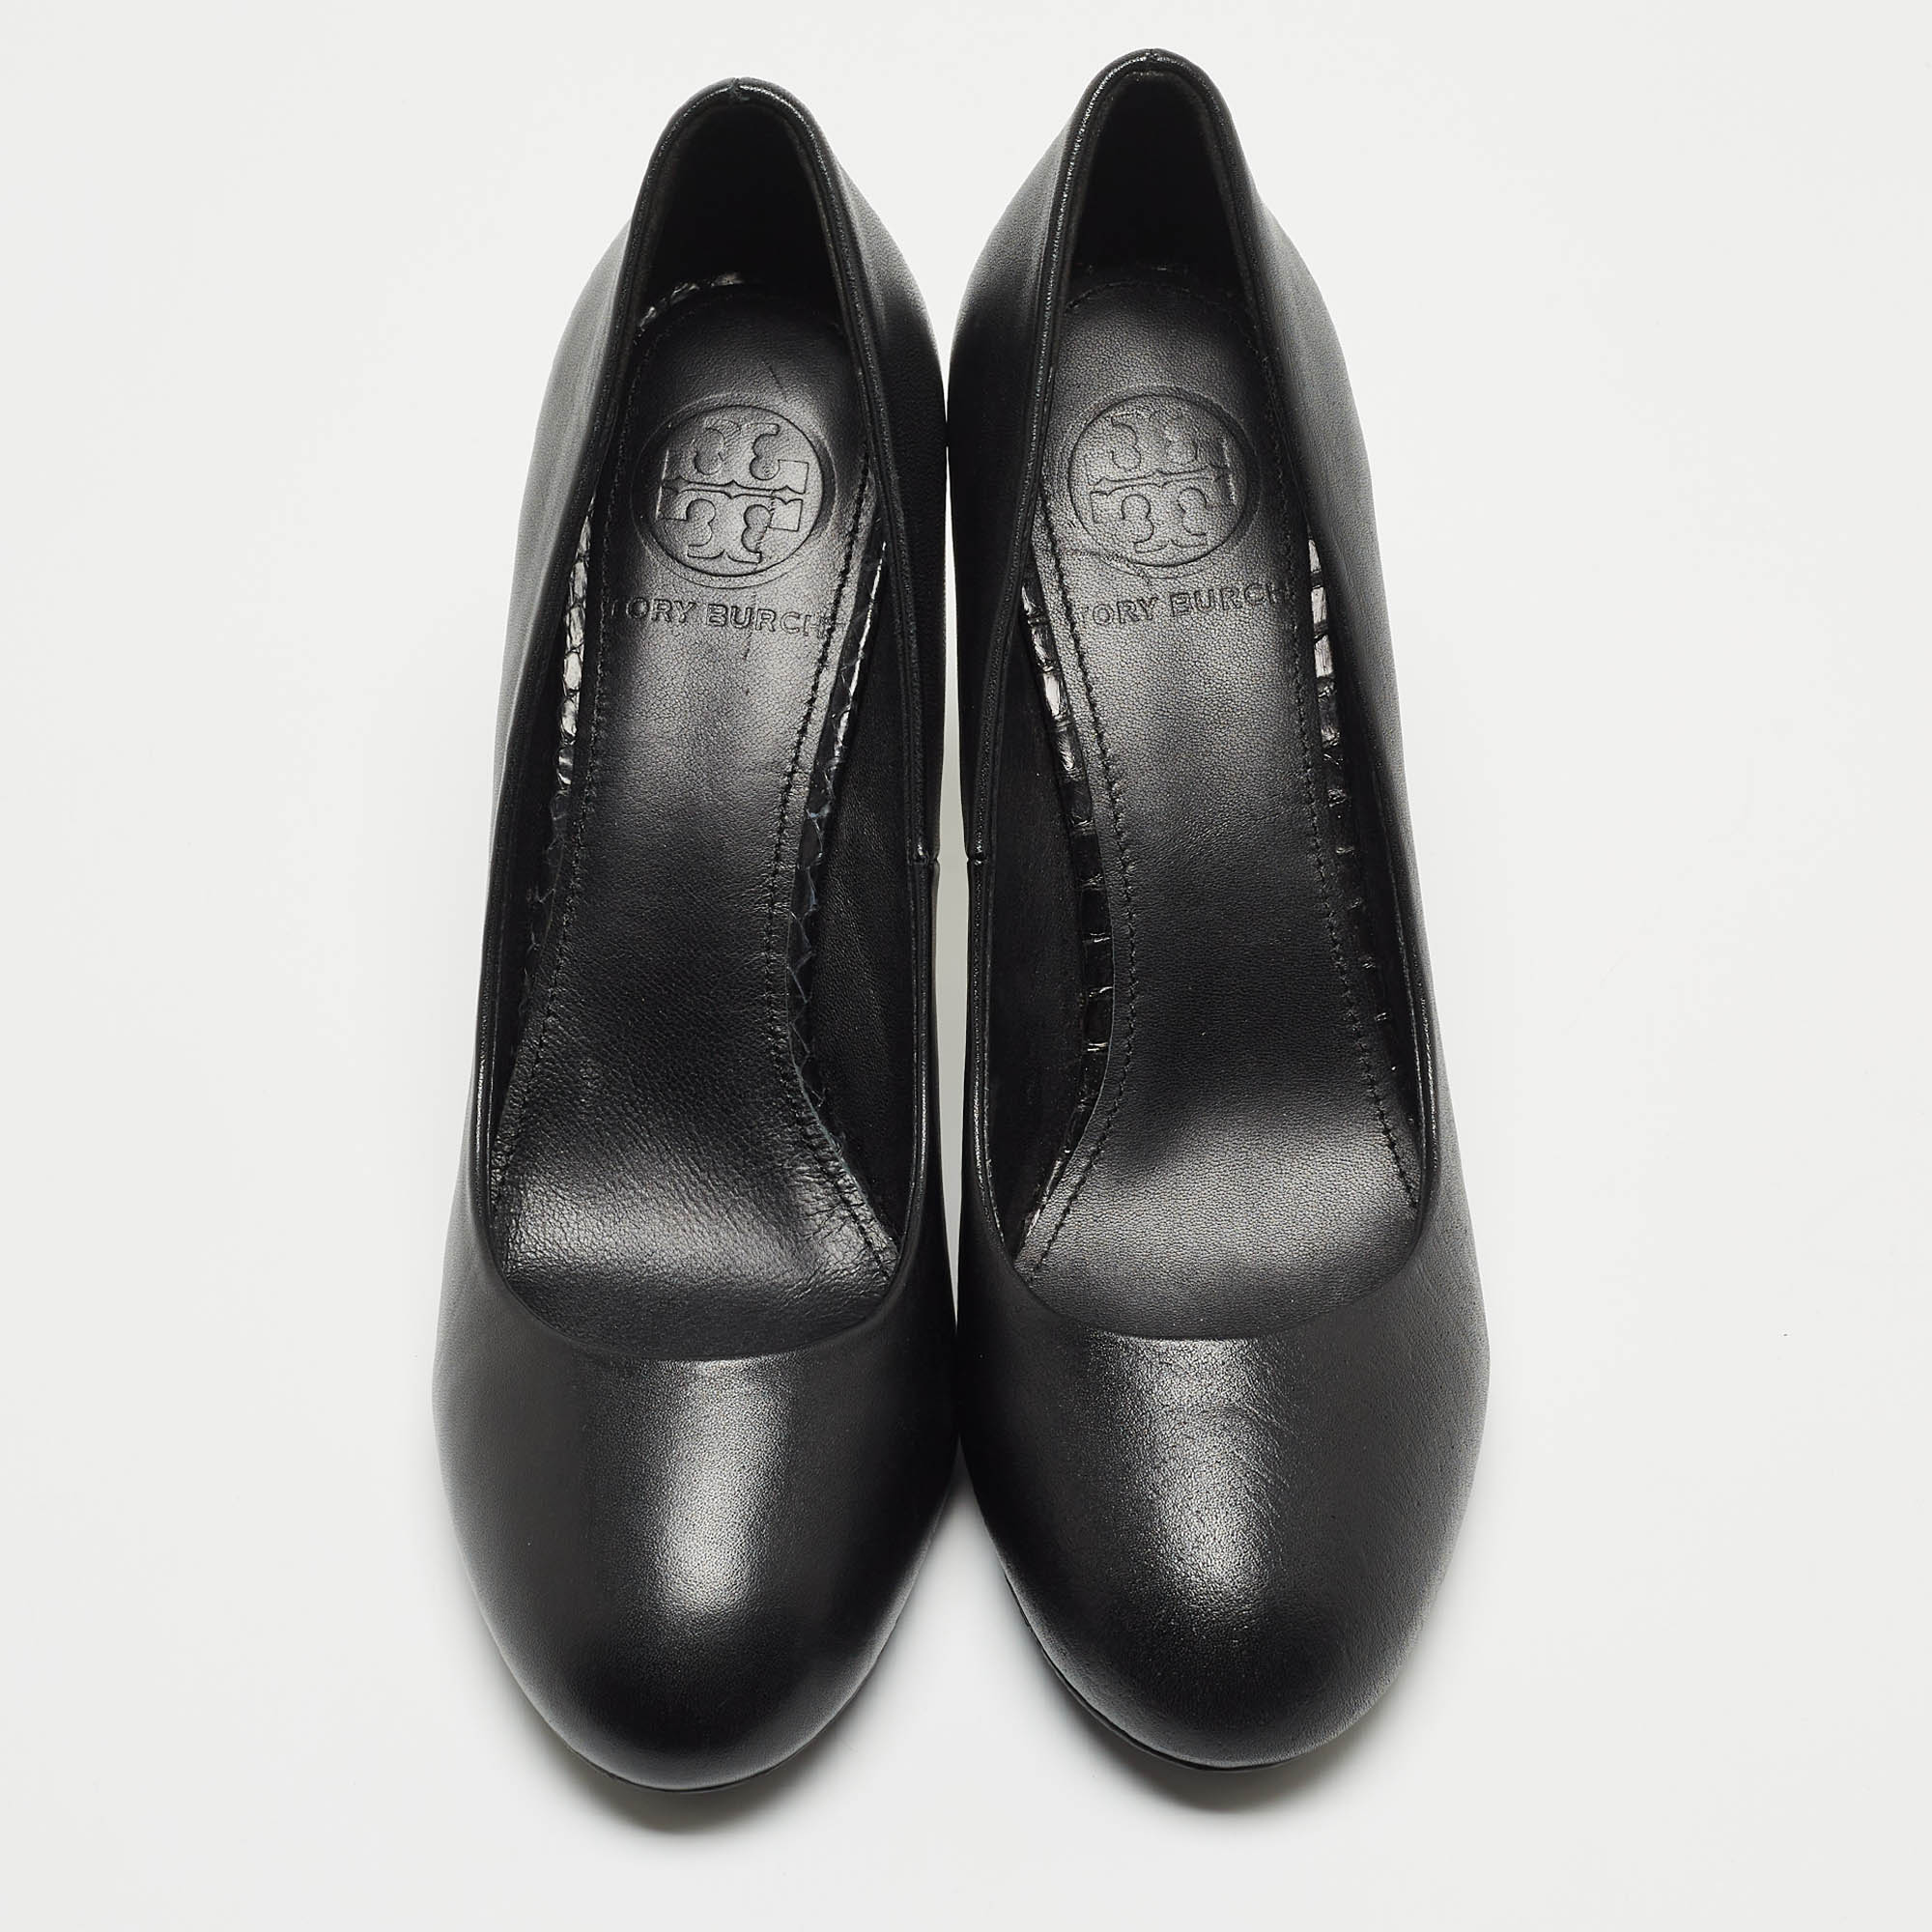 Tory Burch Black Leather Round Toe Pumps Size 37.5